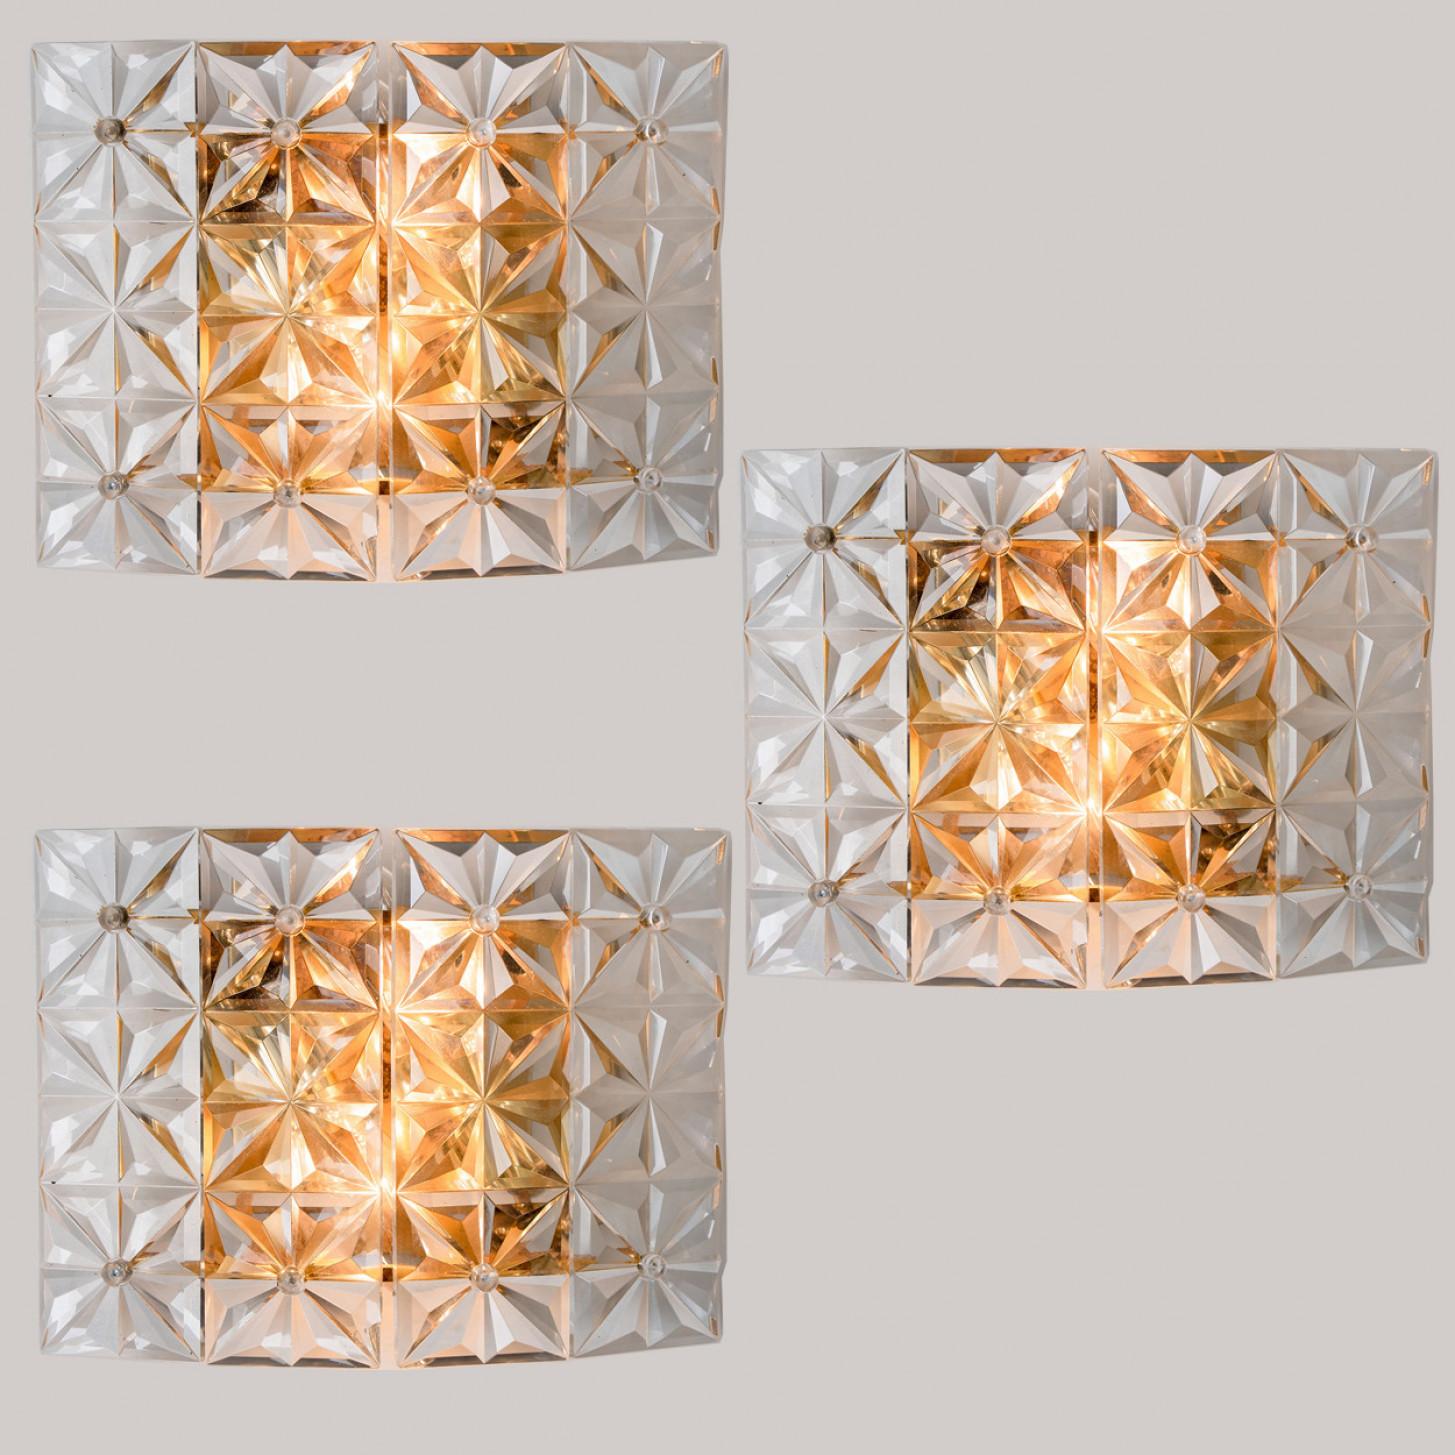 Luxurious gold-plated wall lights with thick crystal glass by the famed maker, Kinkeldey from Germany, Europe. Made in the 1970s. Two-light sources. Very elegant light fixtures, comfortable with all decor periods. The crystals are meticulously cut